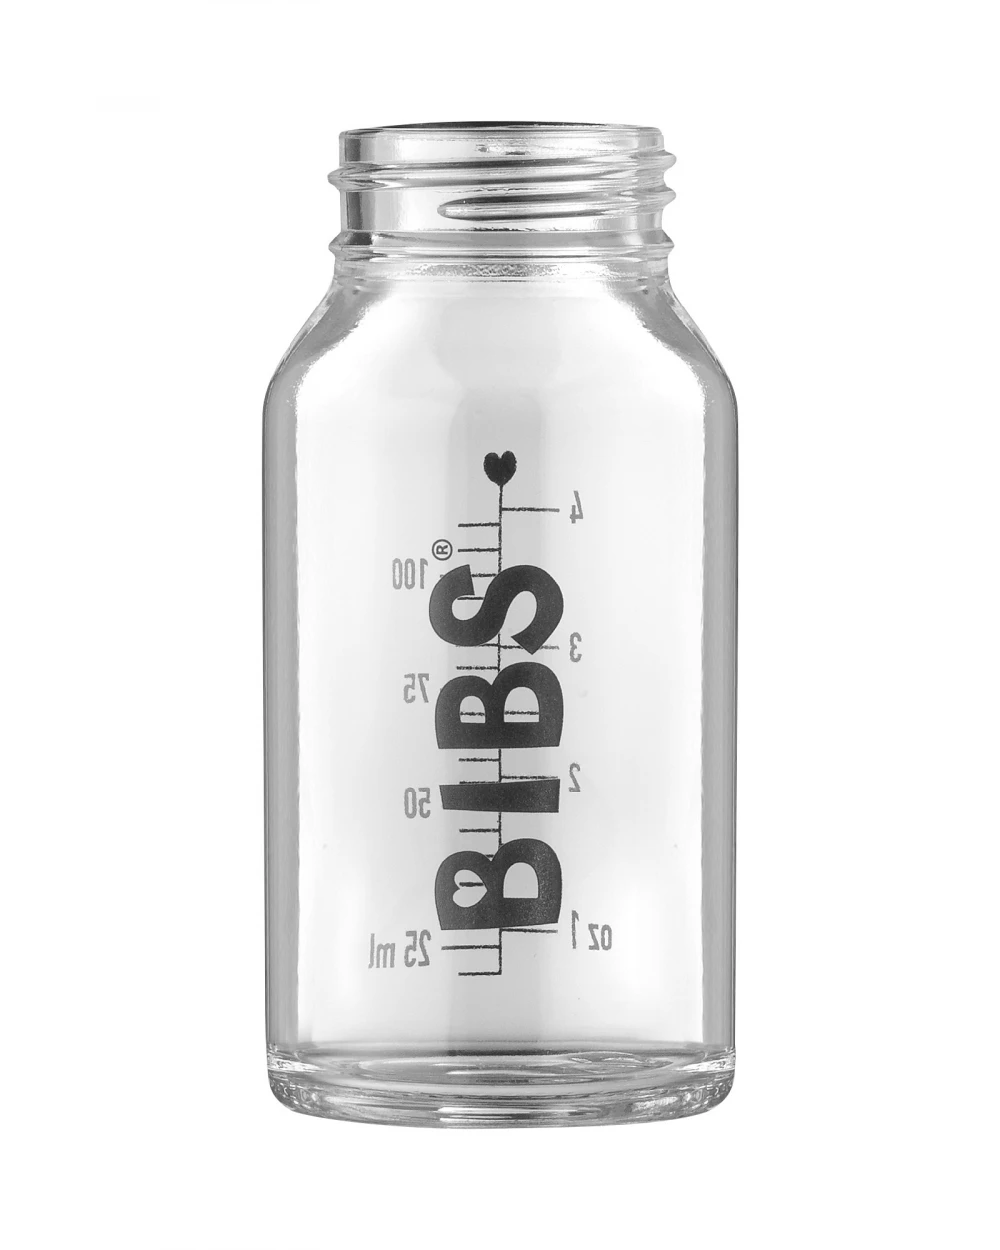 BIBS baby bottle only Replacement glass bottle